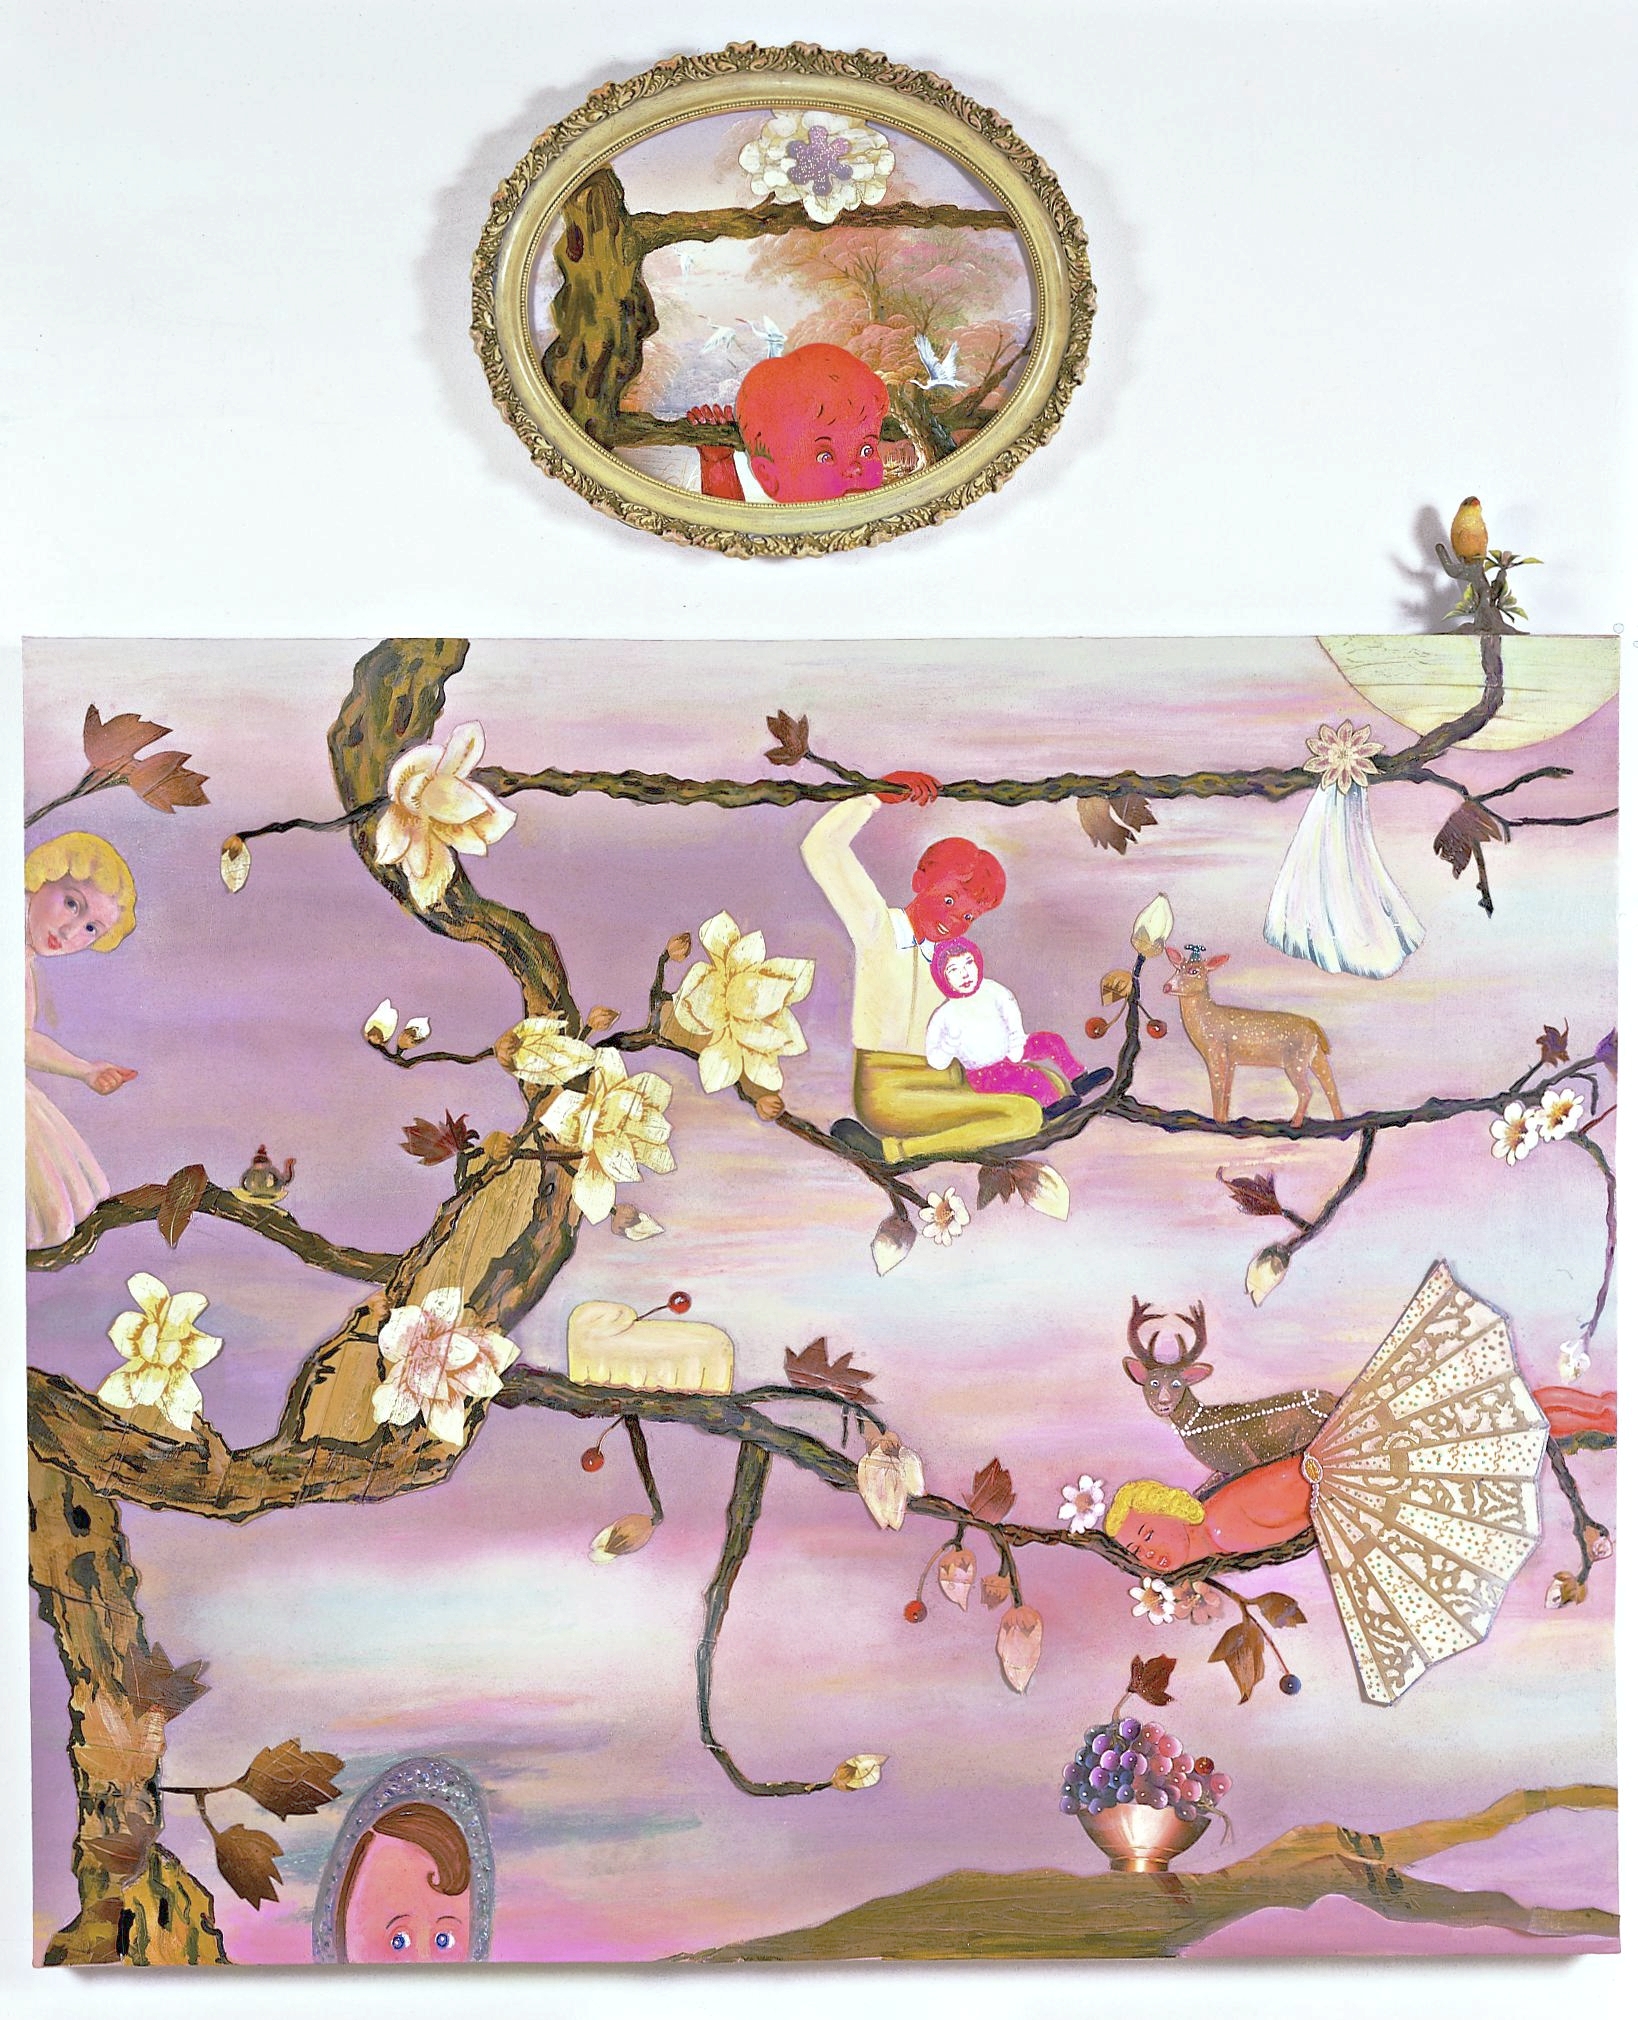 Born Aloft an Erotic Gust of Wind, 71" × 60", mixed media and collage on canvas, 2004